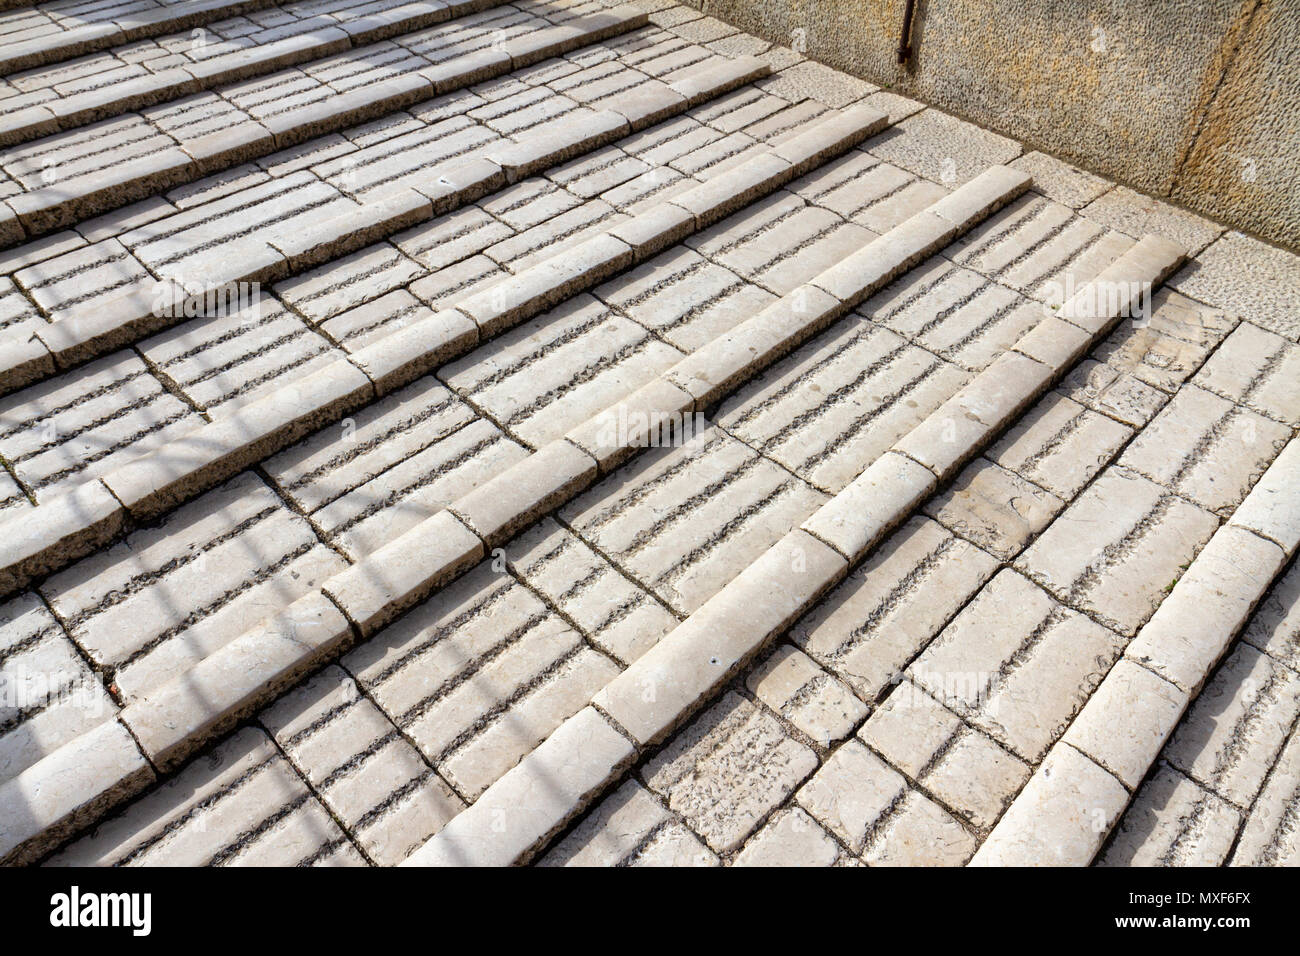 Detail showing the uneven surface of the walkway across the historic Stari Most (Old Bridge) in Mostar, the Federation of Bosnia and Herzegovina. Stock Photo